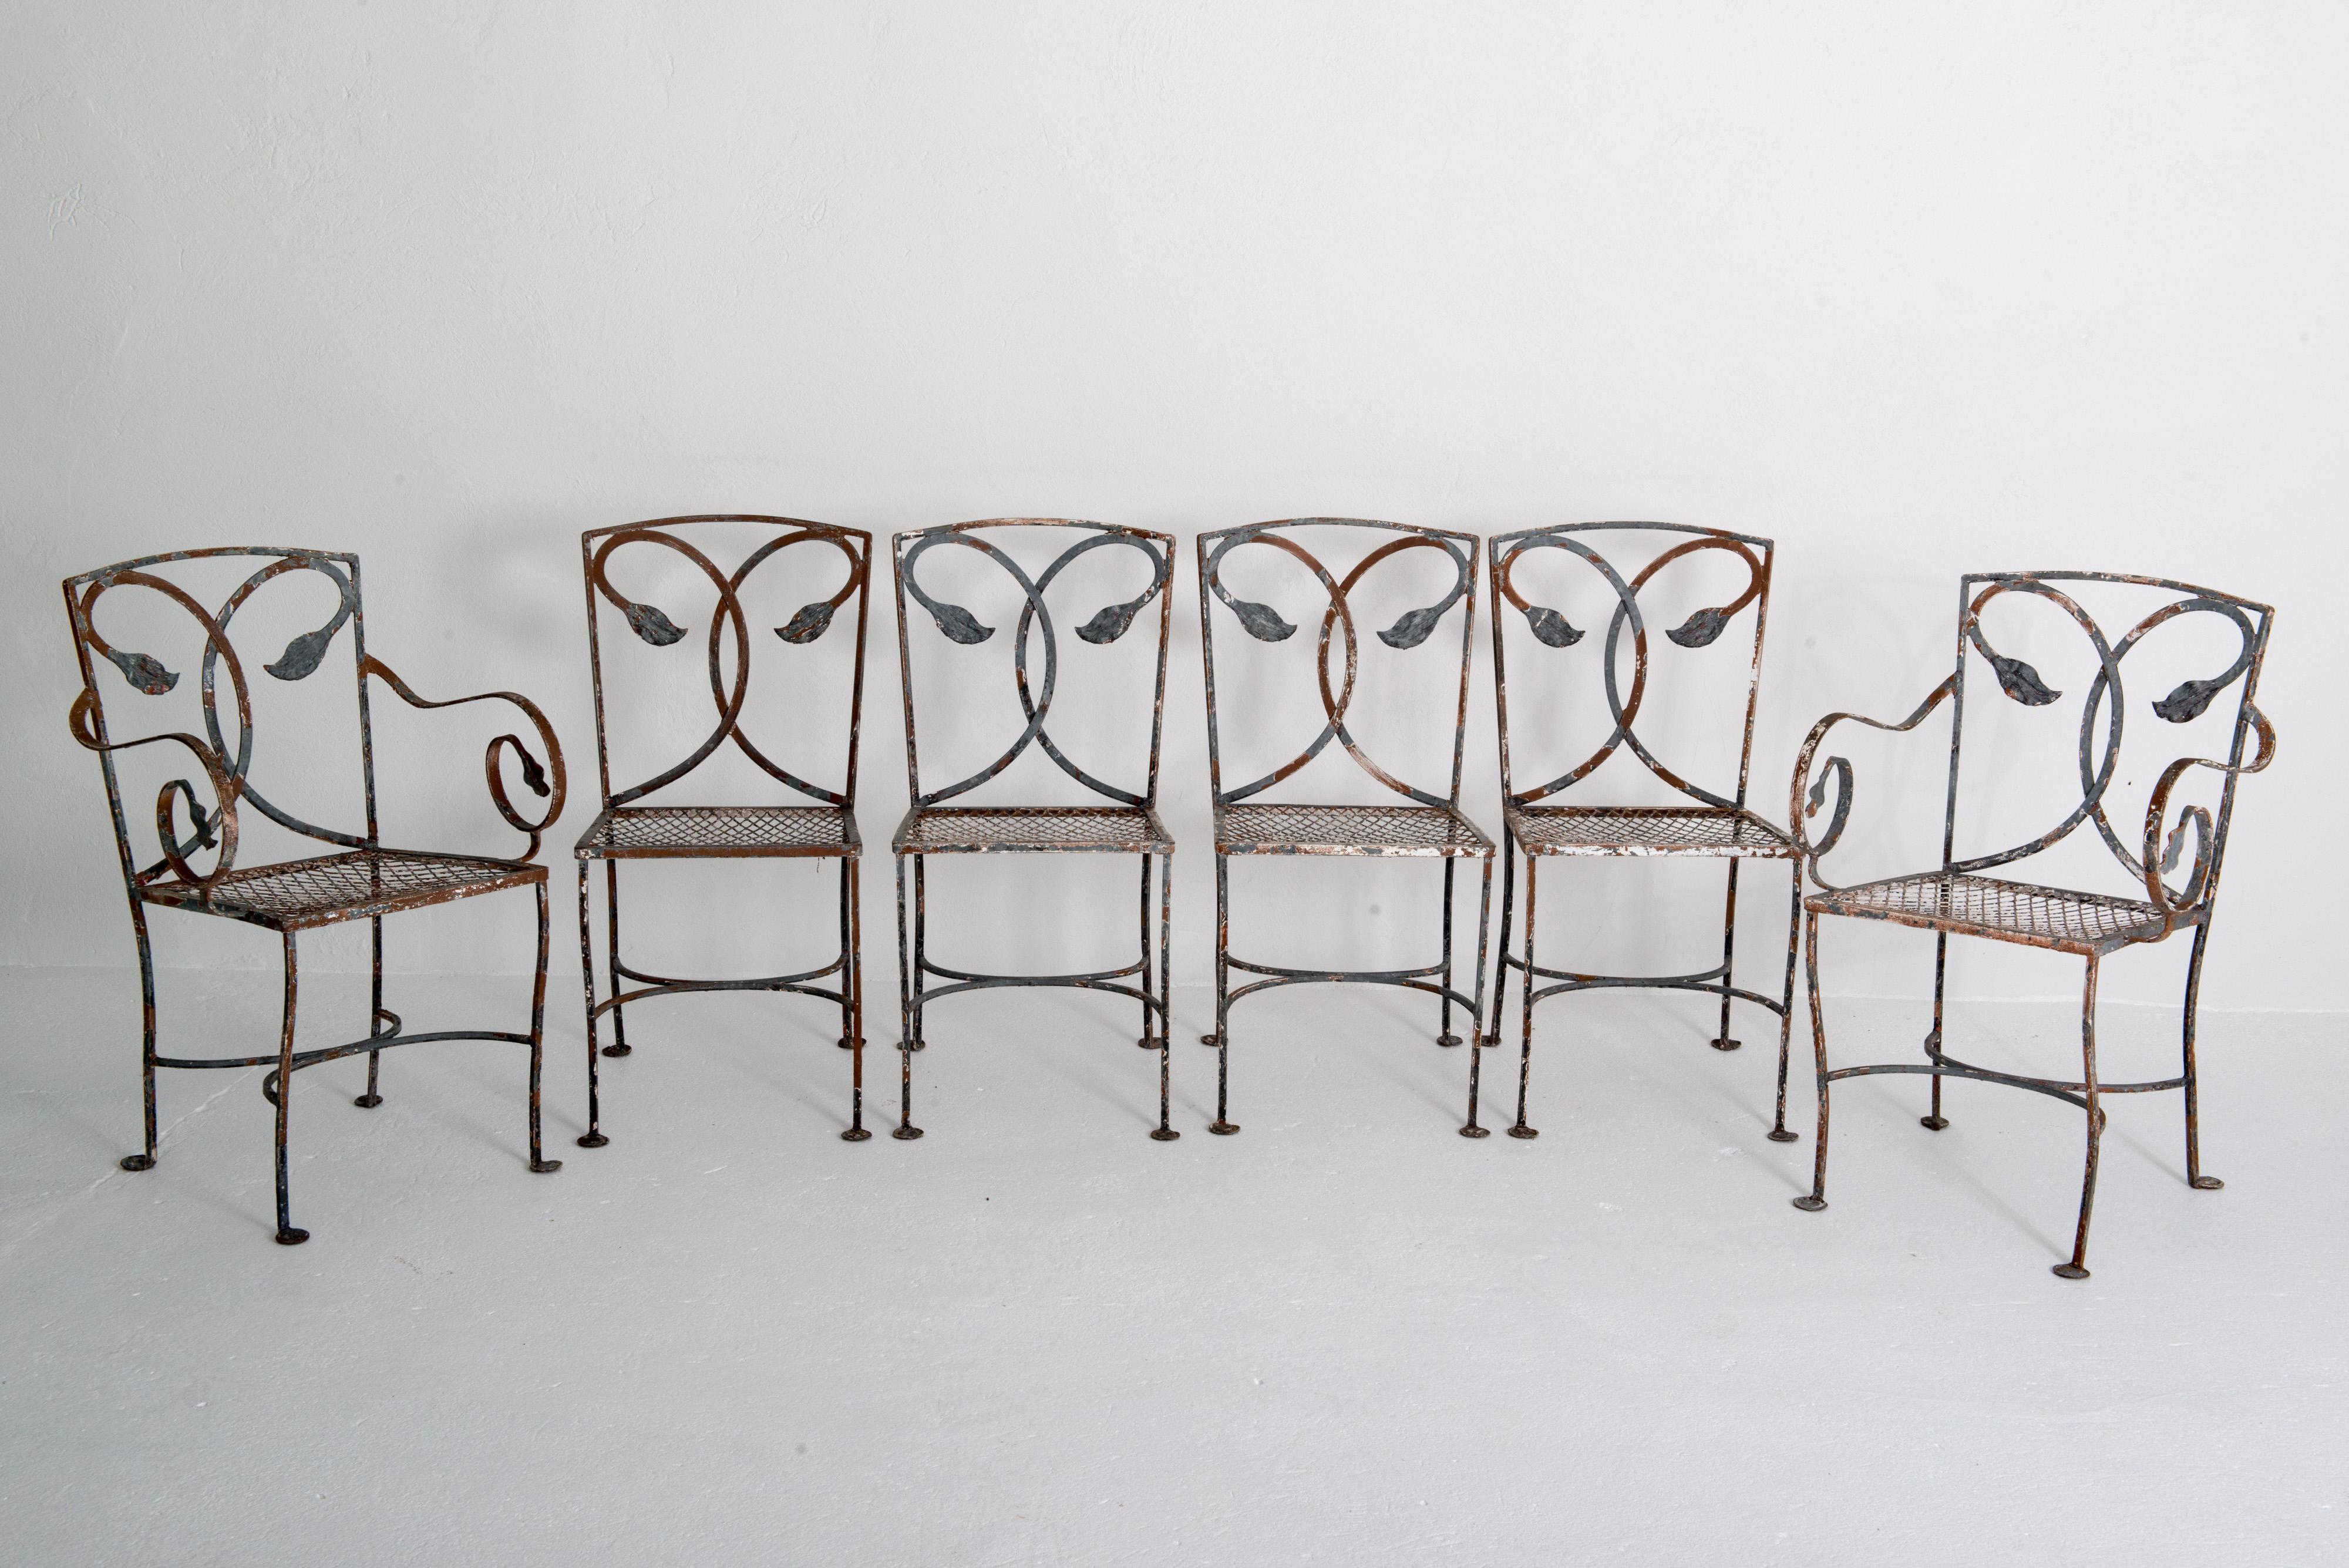 Six 1930s hand wrought iron Salterini dining chairs. Two arm chairs & four side chairs. Side Chair: 16.75